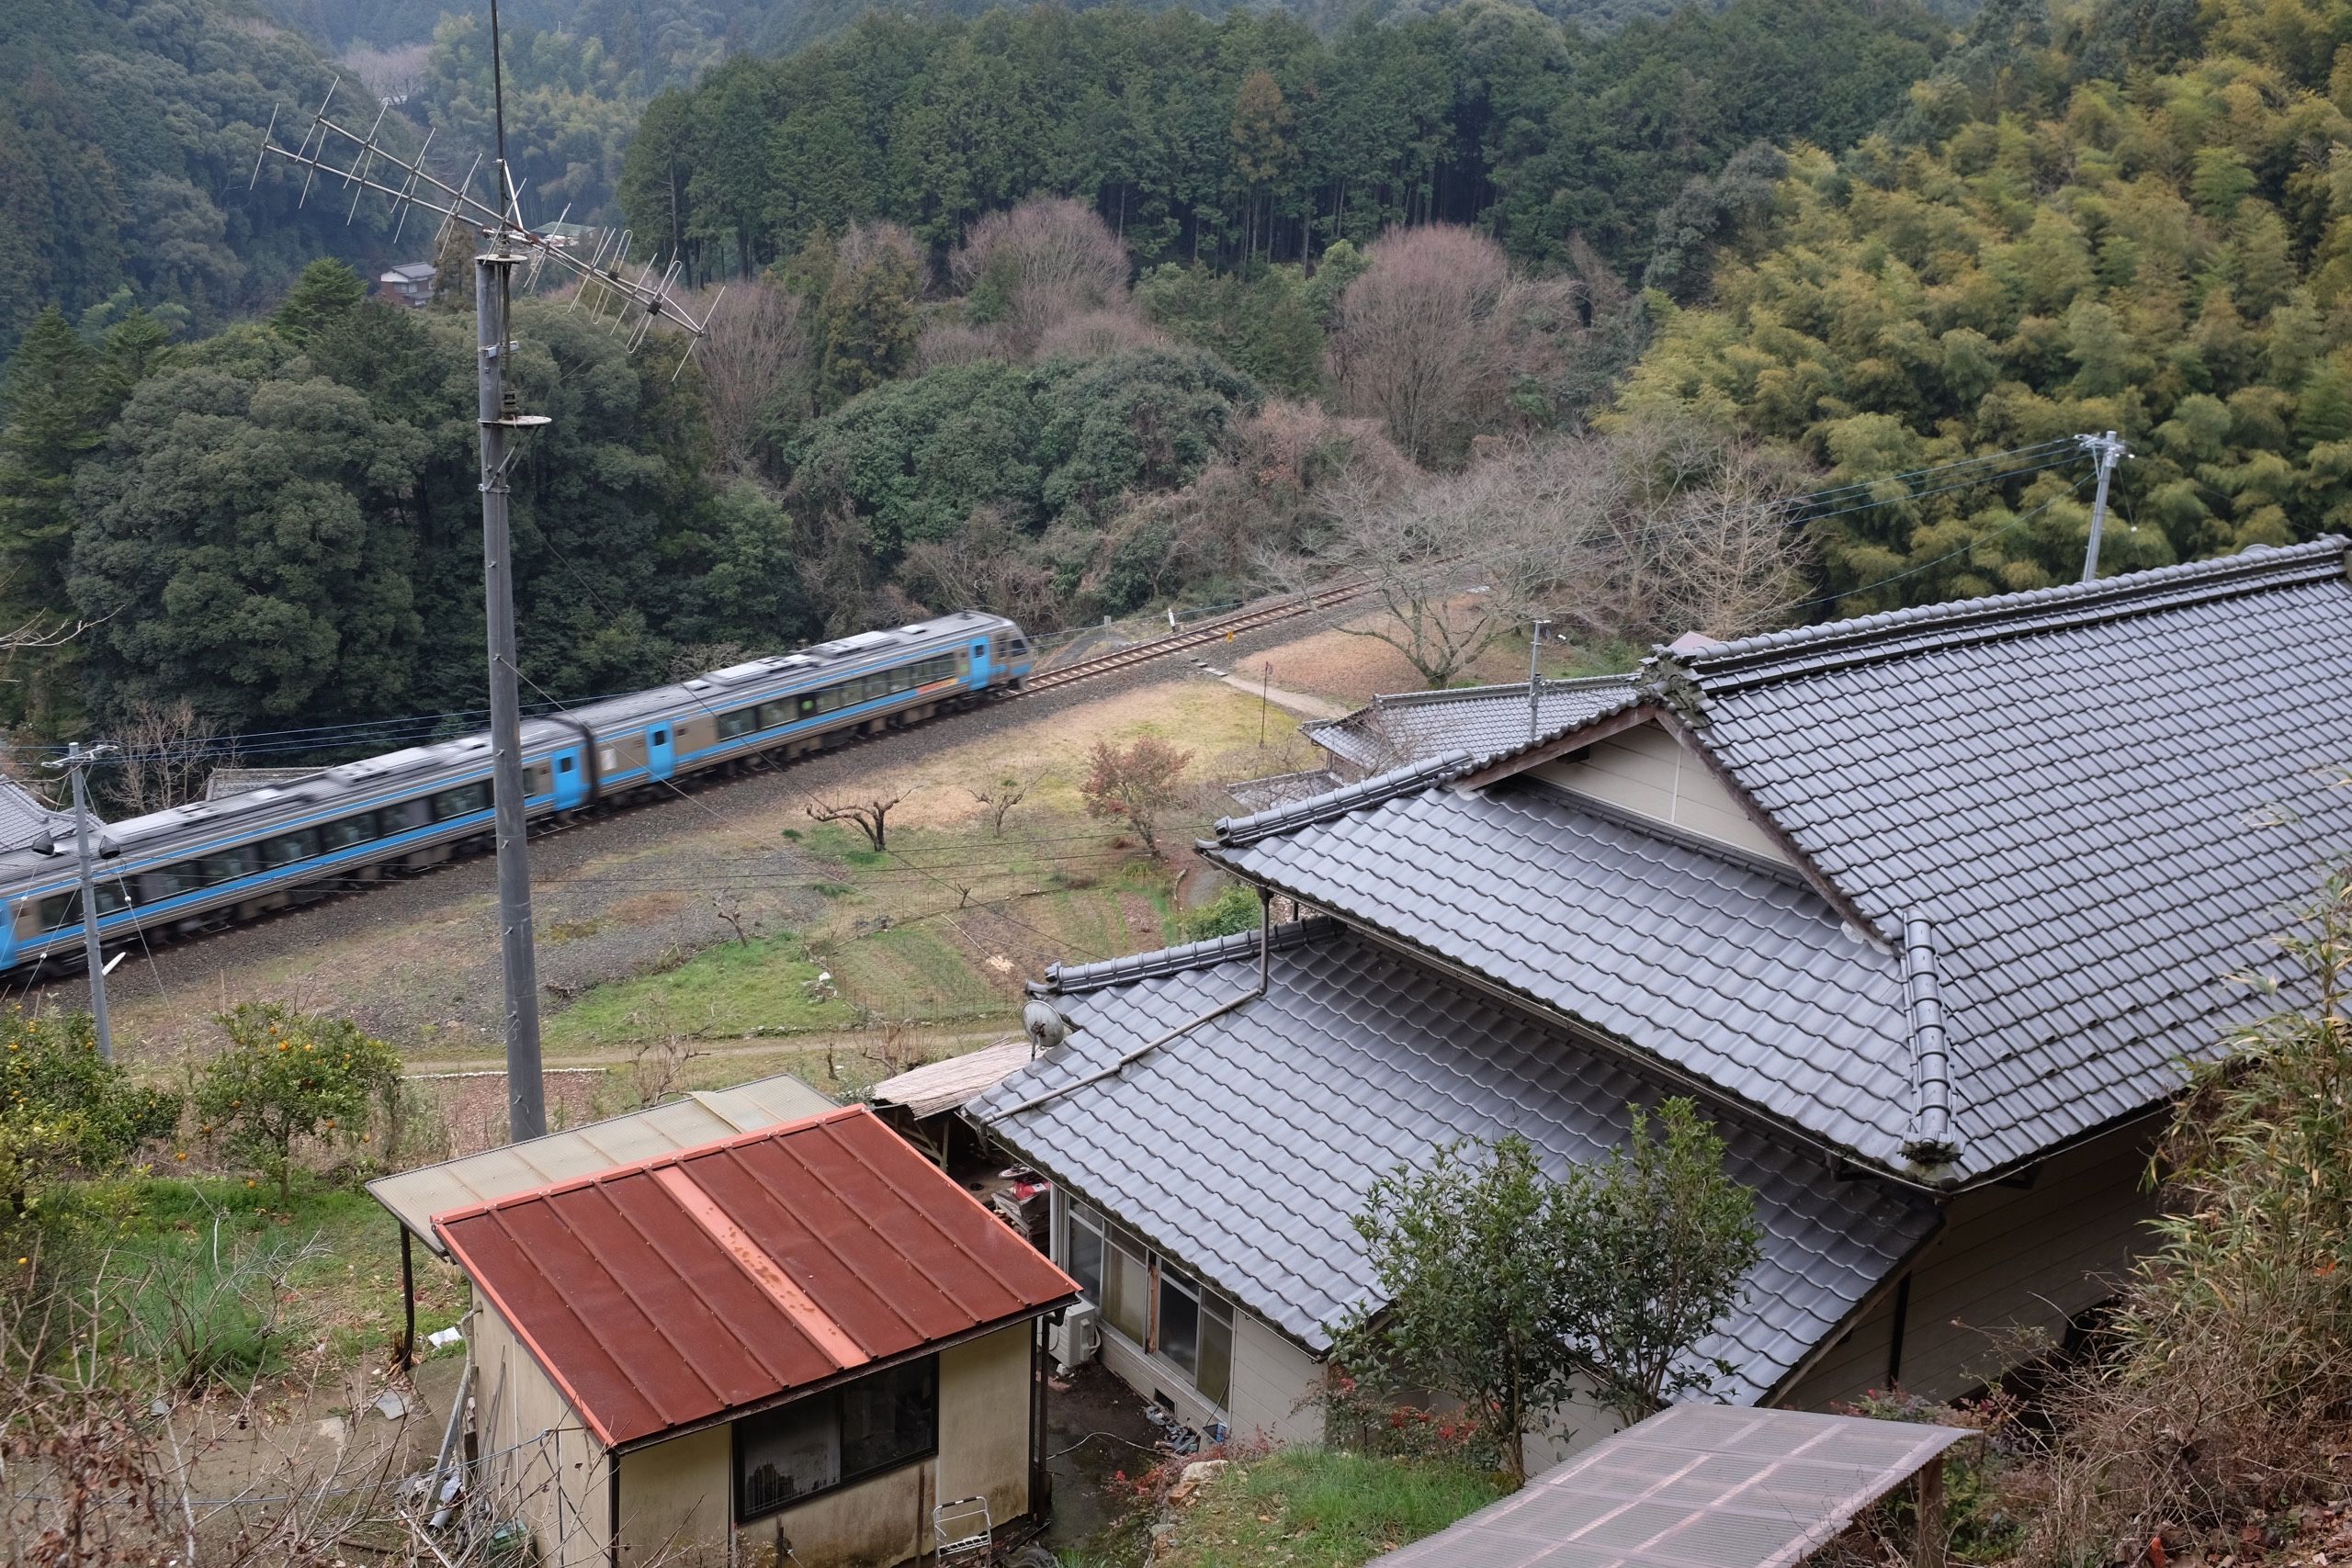 A blue express train passes a Japanese house in the hills.